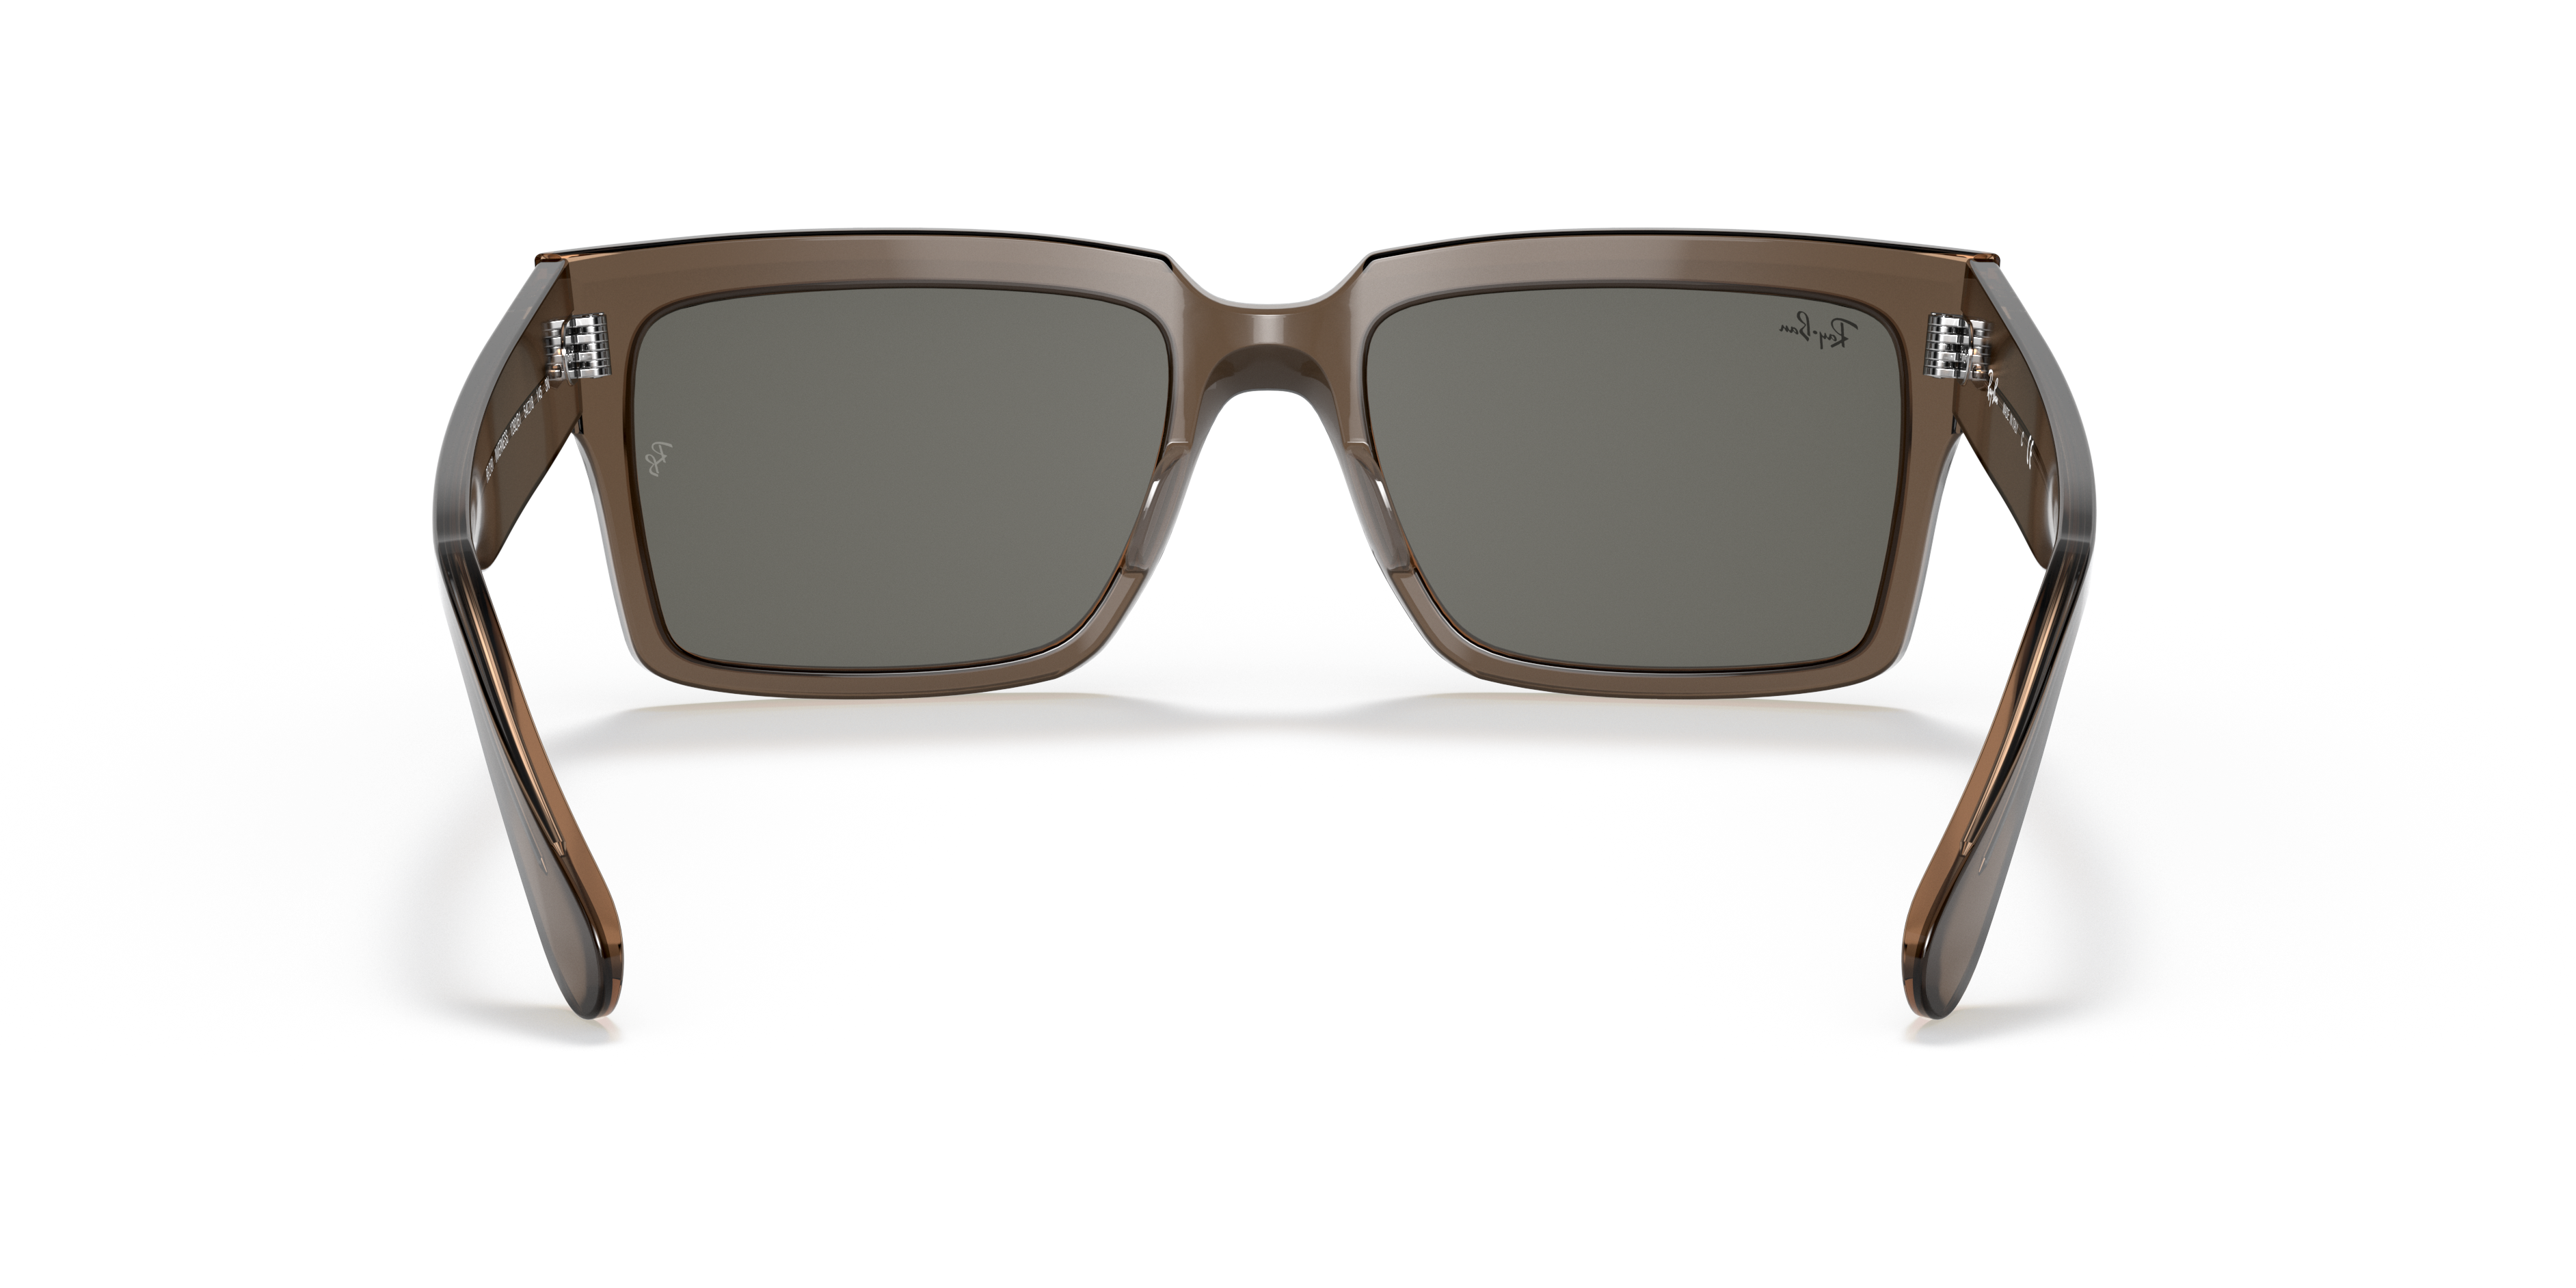 Inverness Sunglasses in Tortoise and Dark Grey | Ray-Ban®